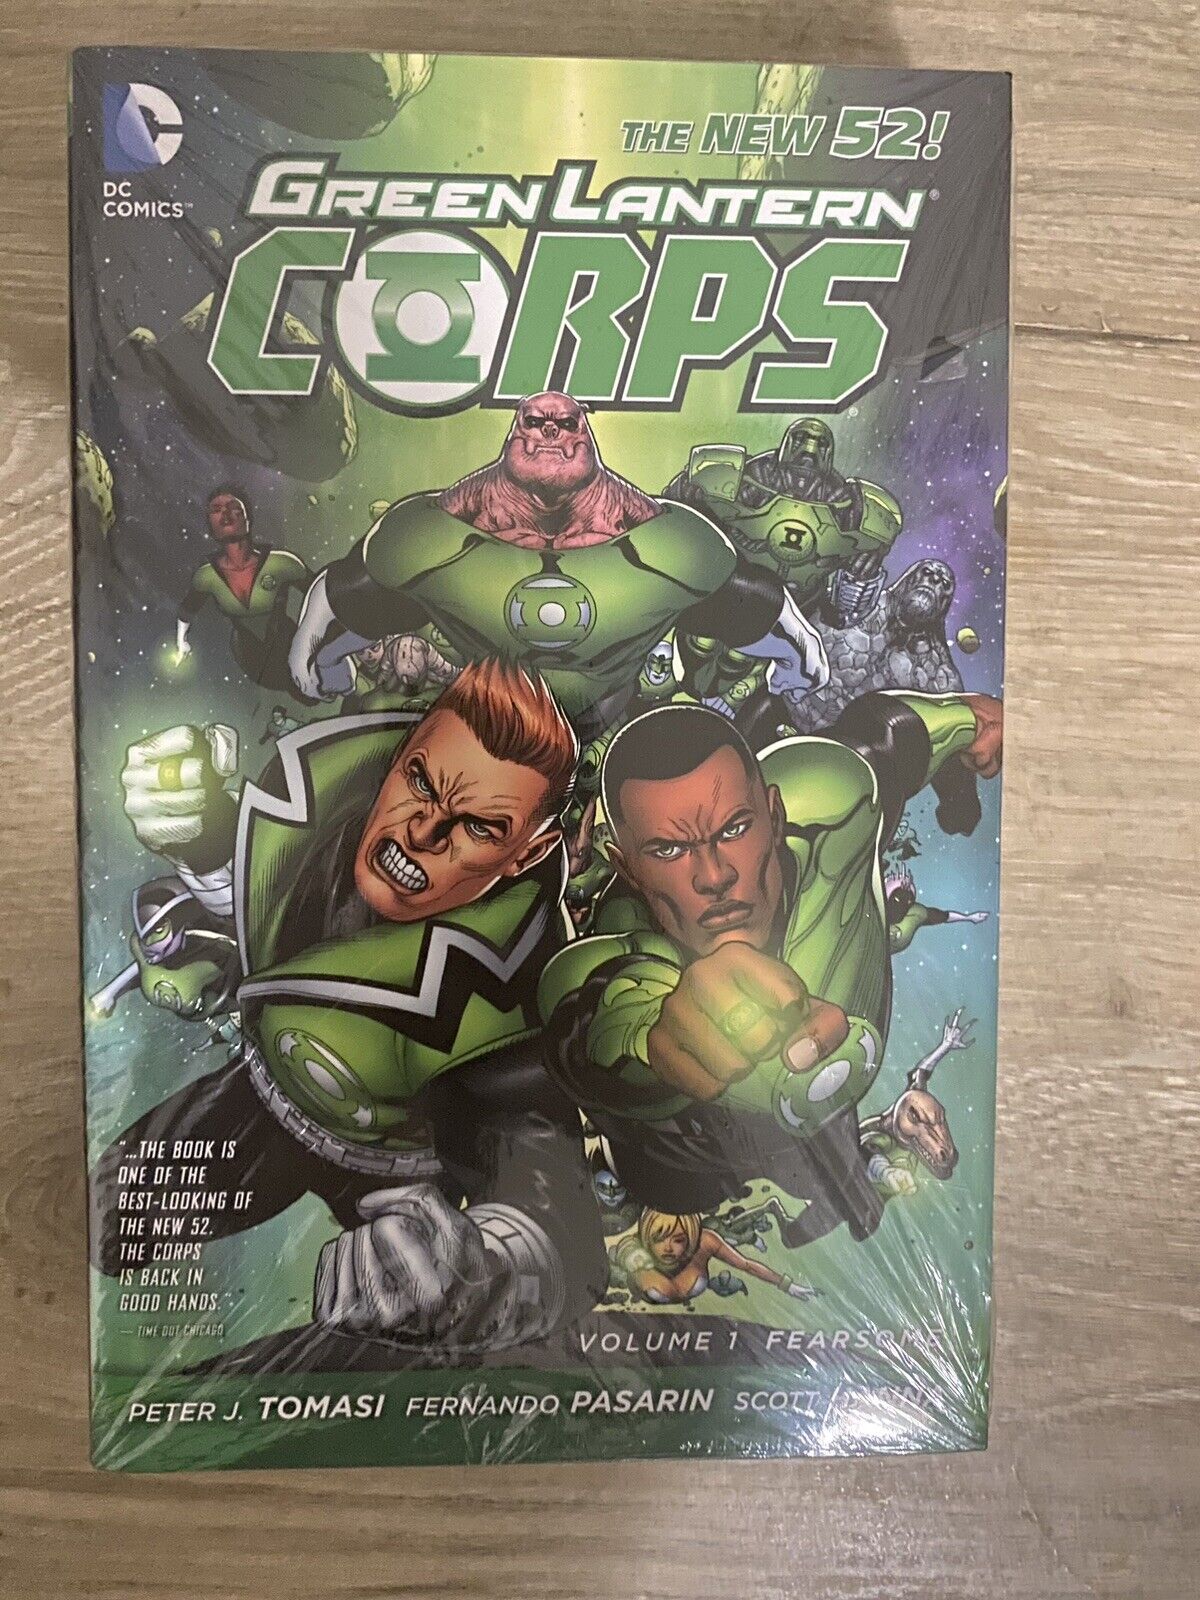 GREEN LANTERN CORPS vol. 1-3 hardcover NEW 52 mint, sealed